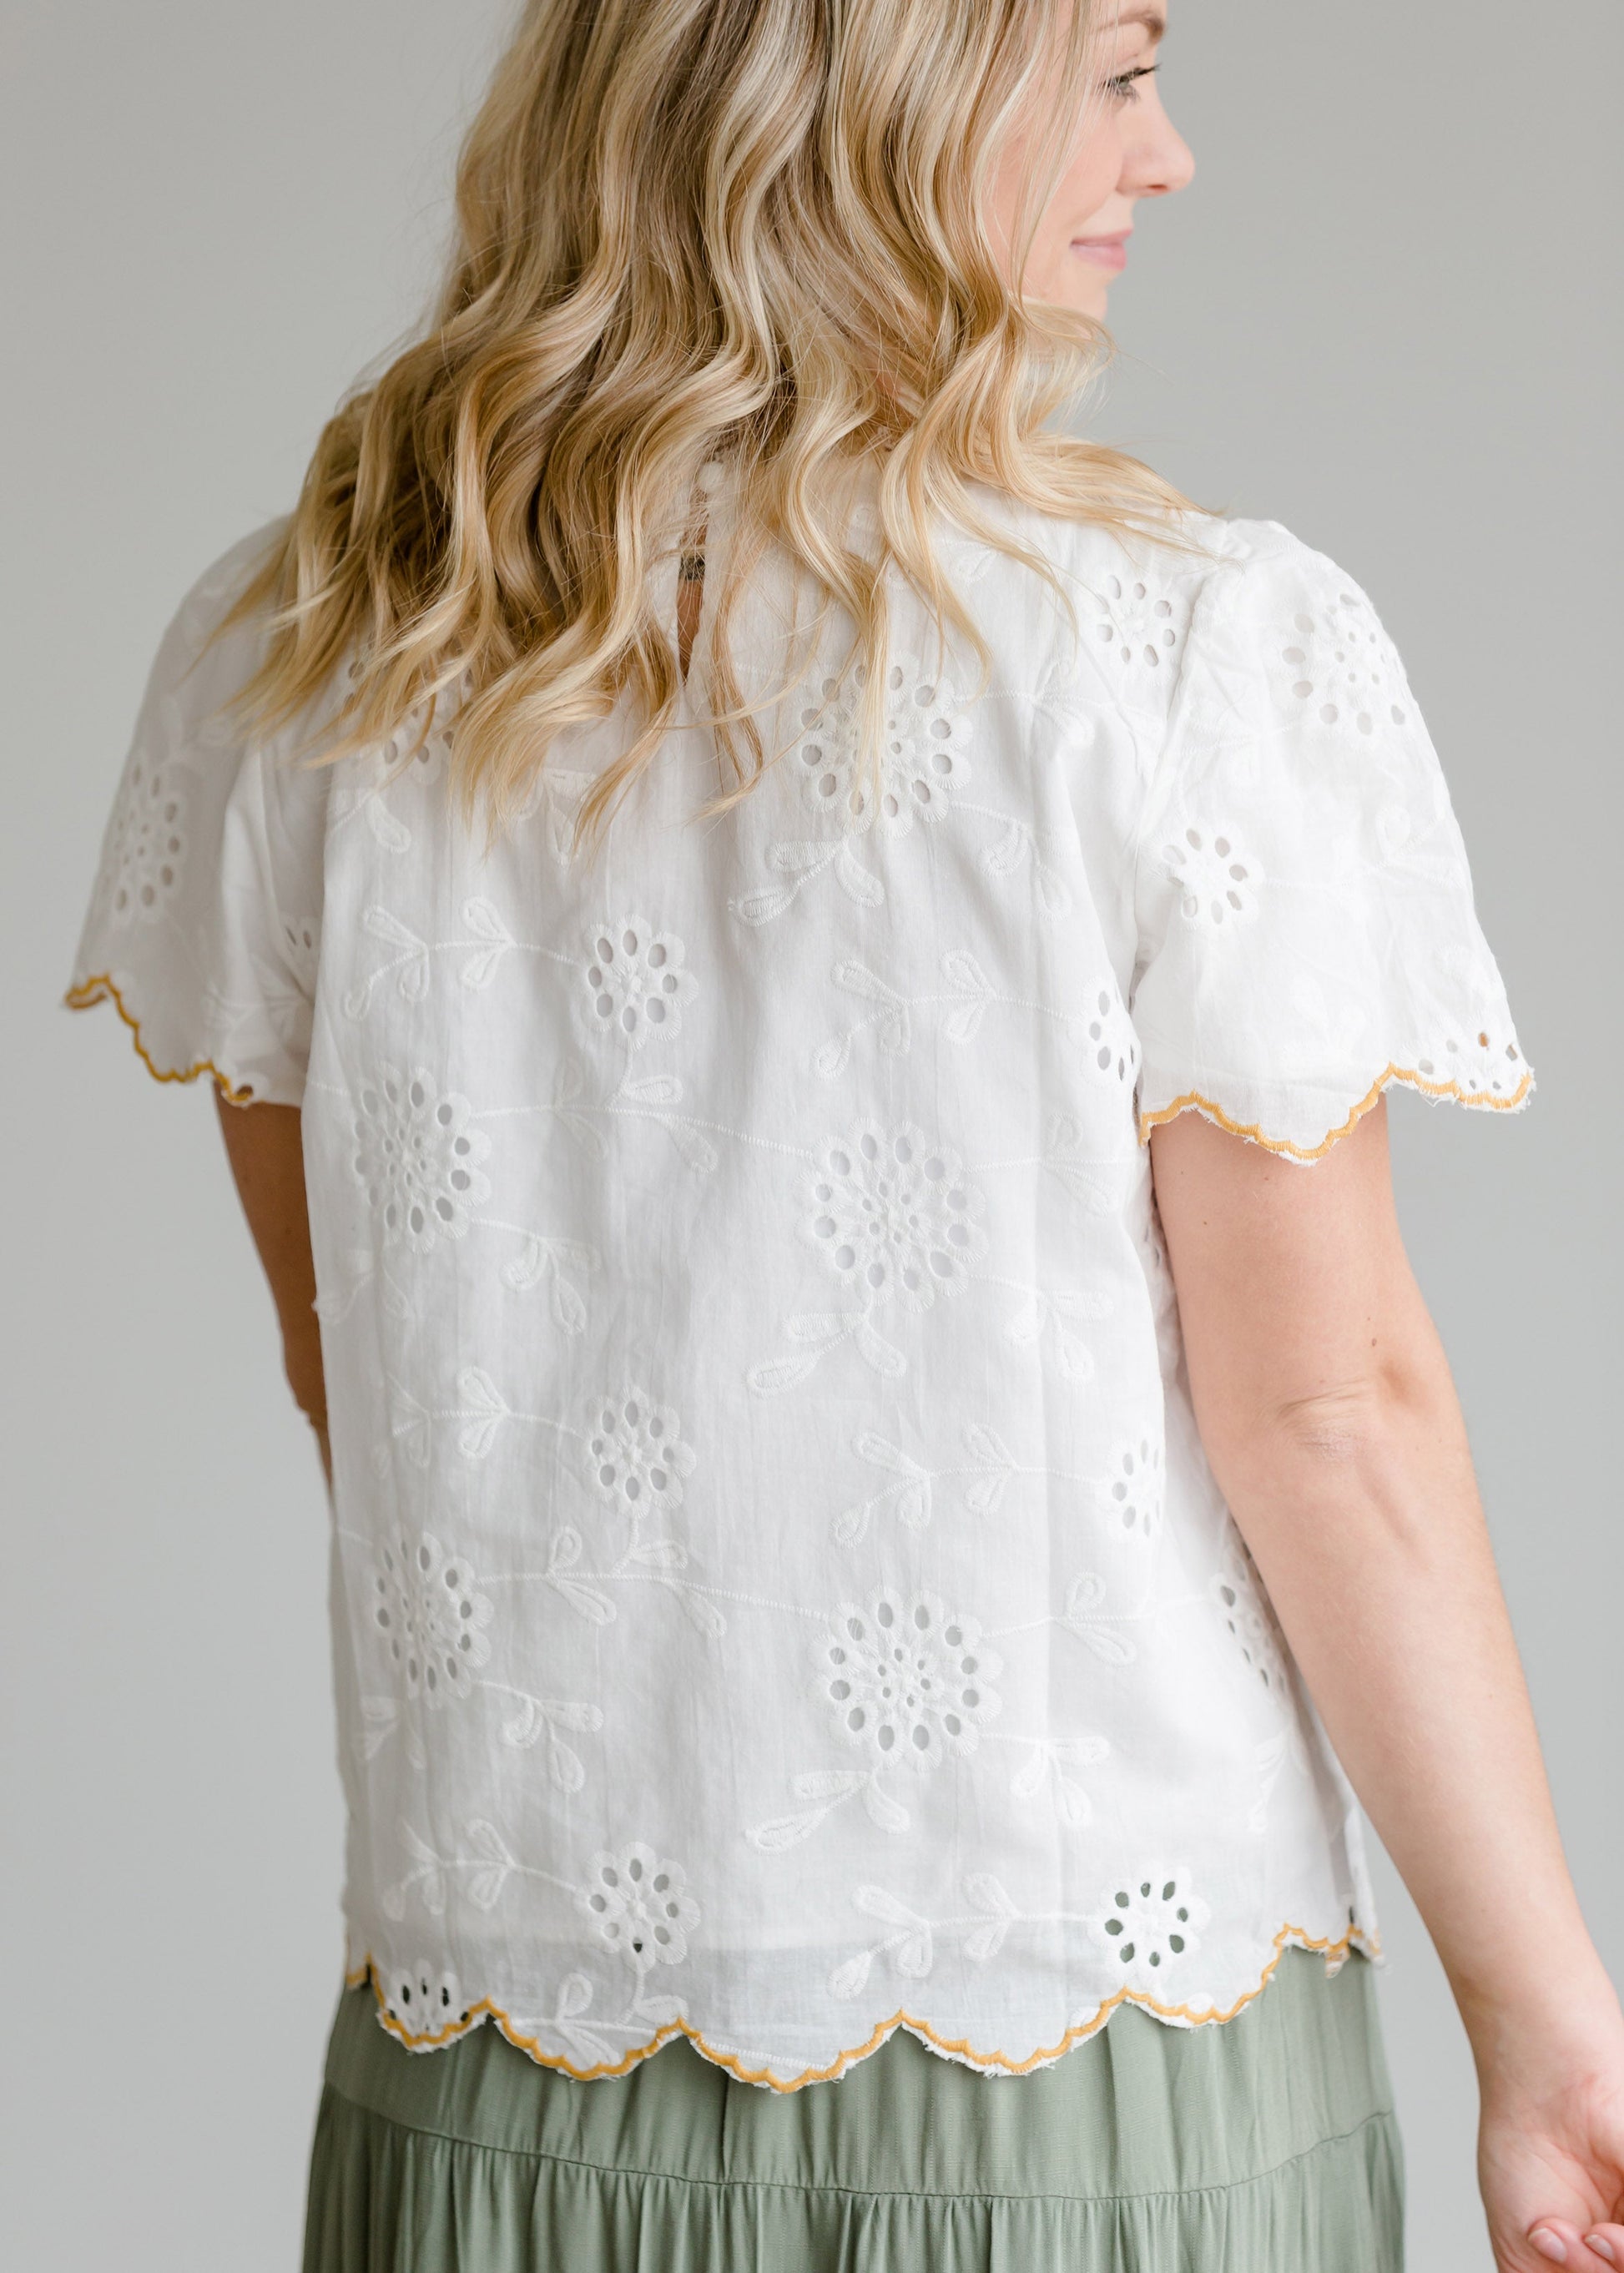 Embroidered Scalloped Hem Top - FINAL SALE Tops